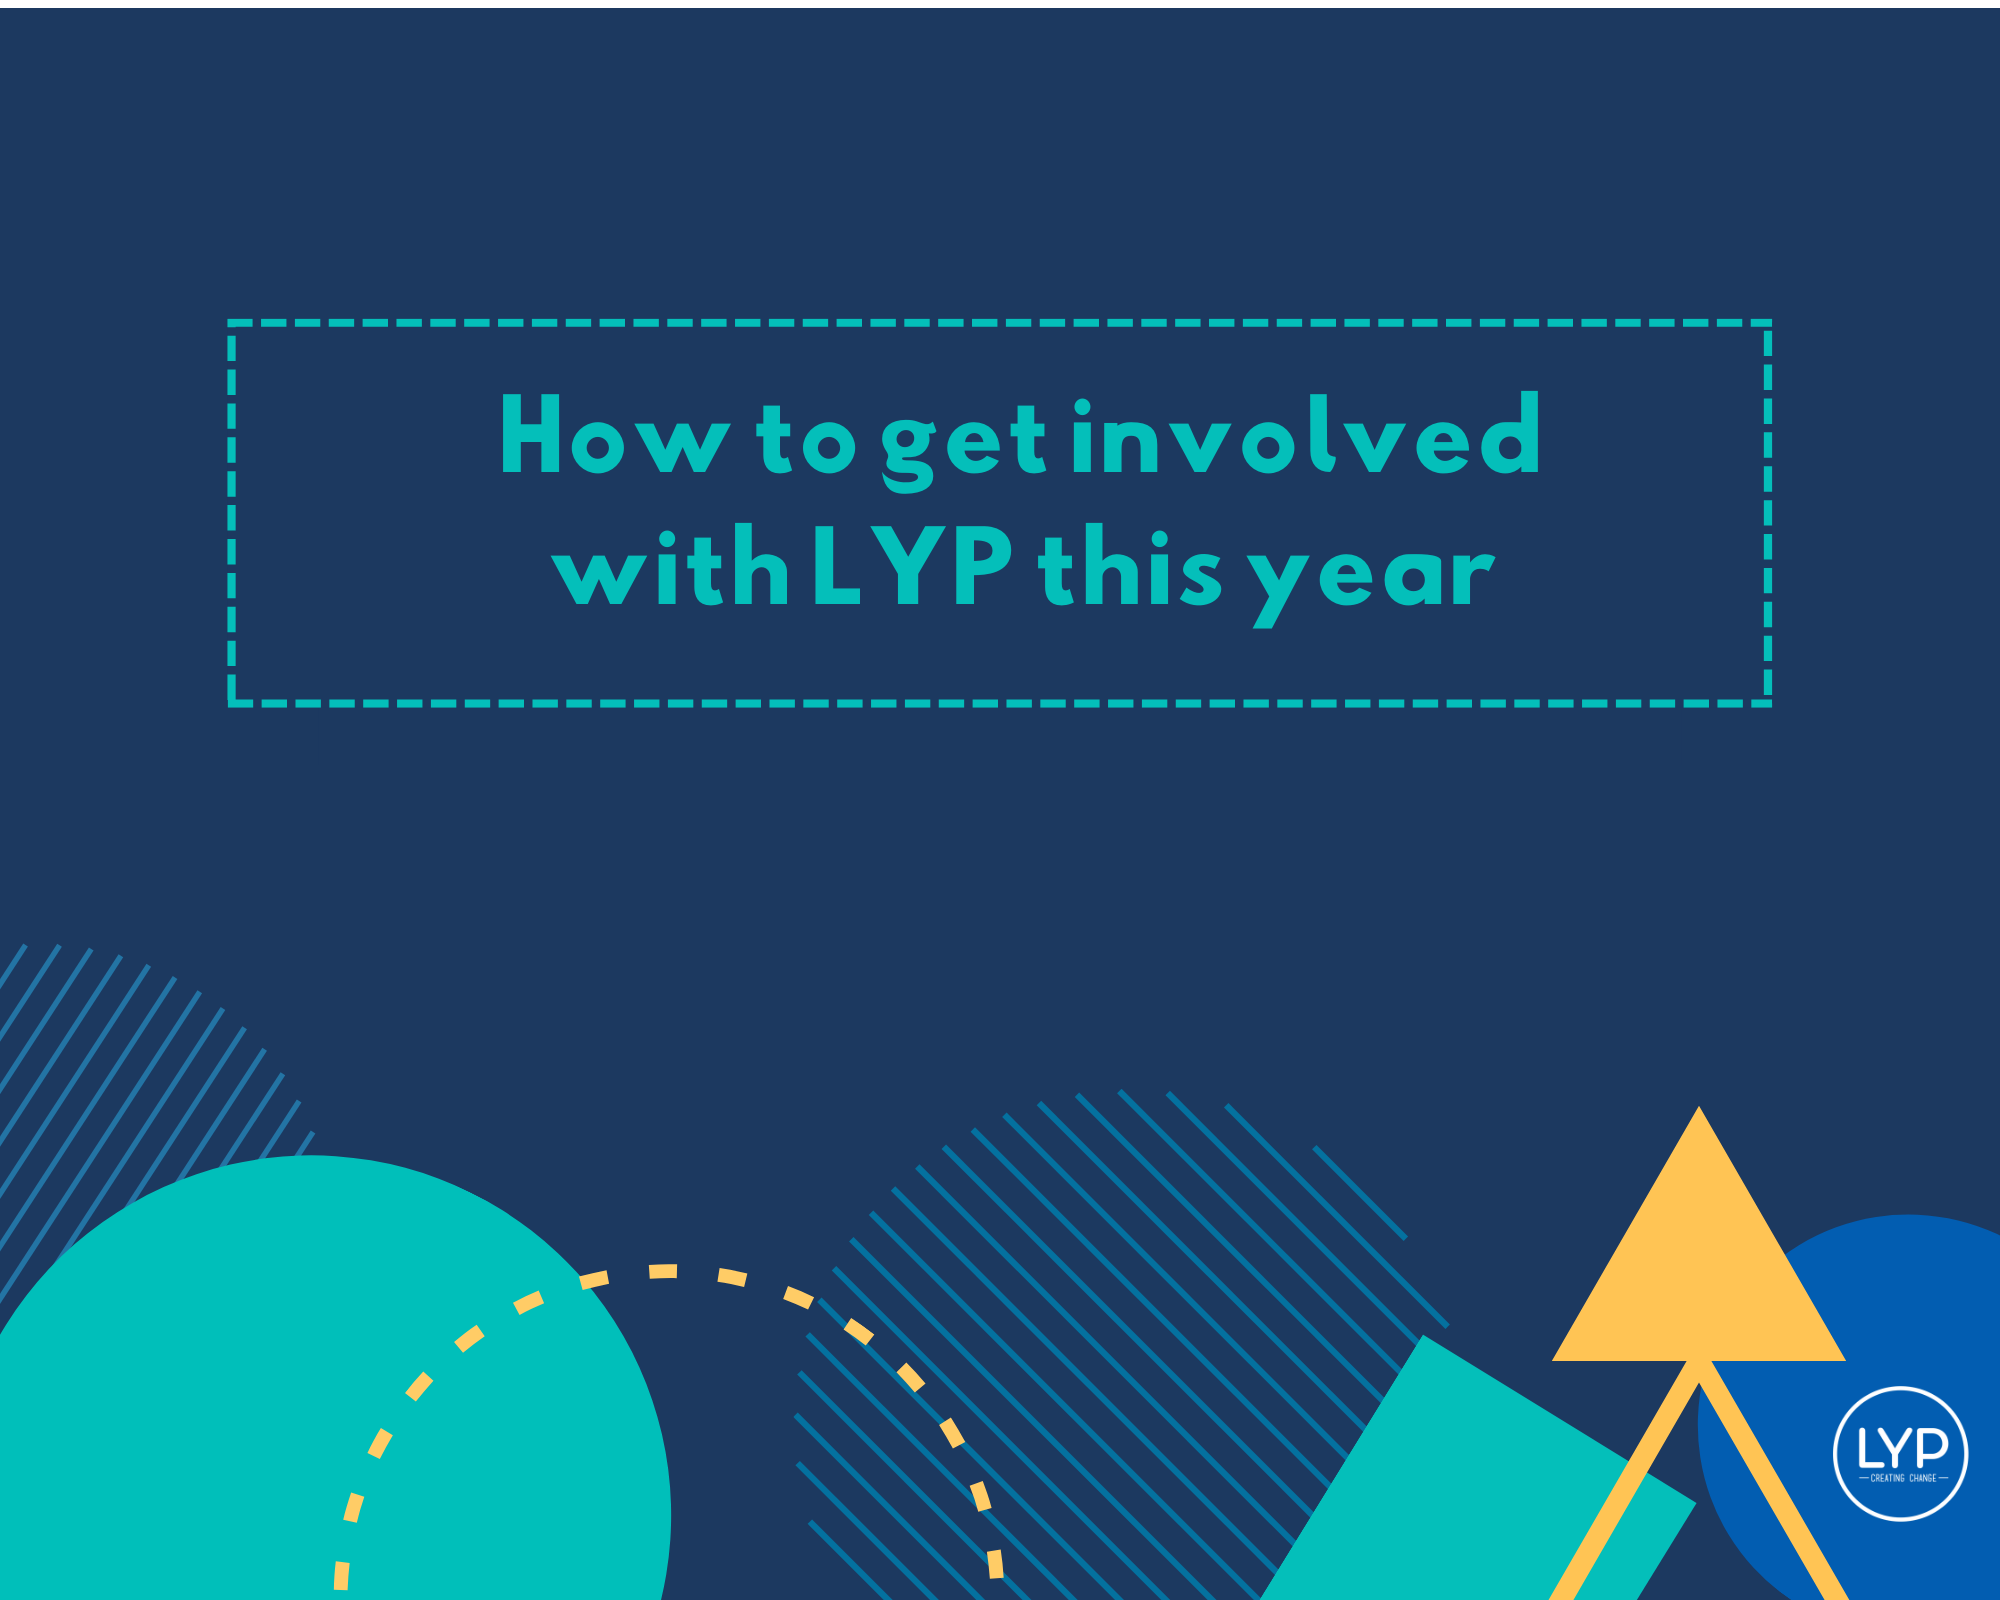 How To Get Involved With LYP This Year